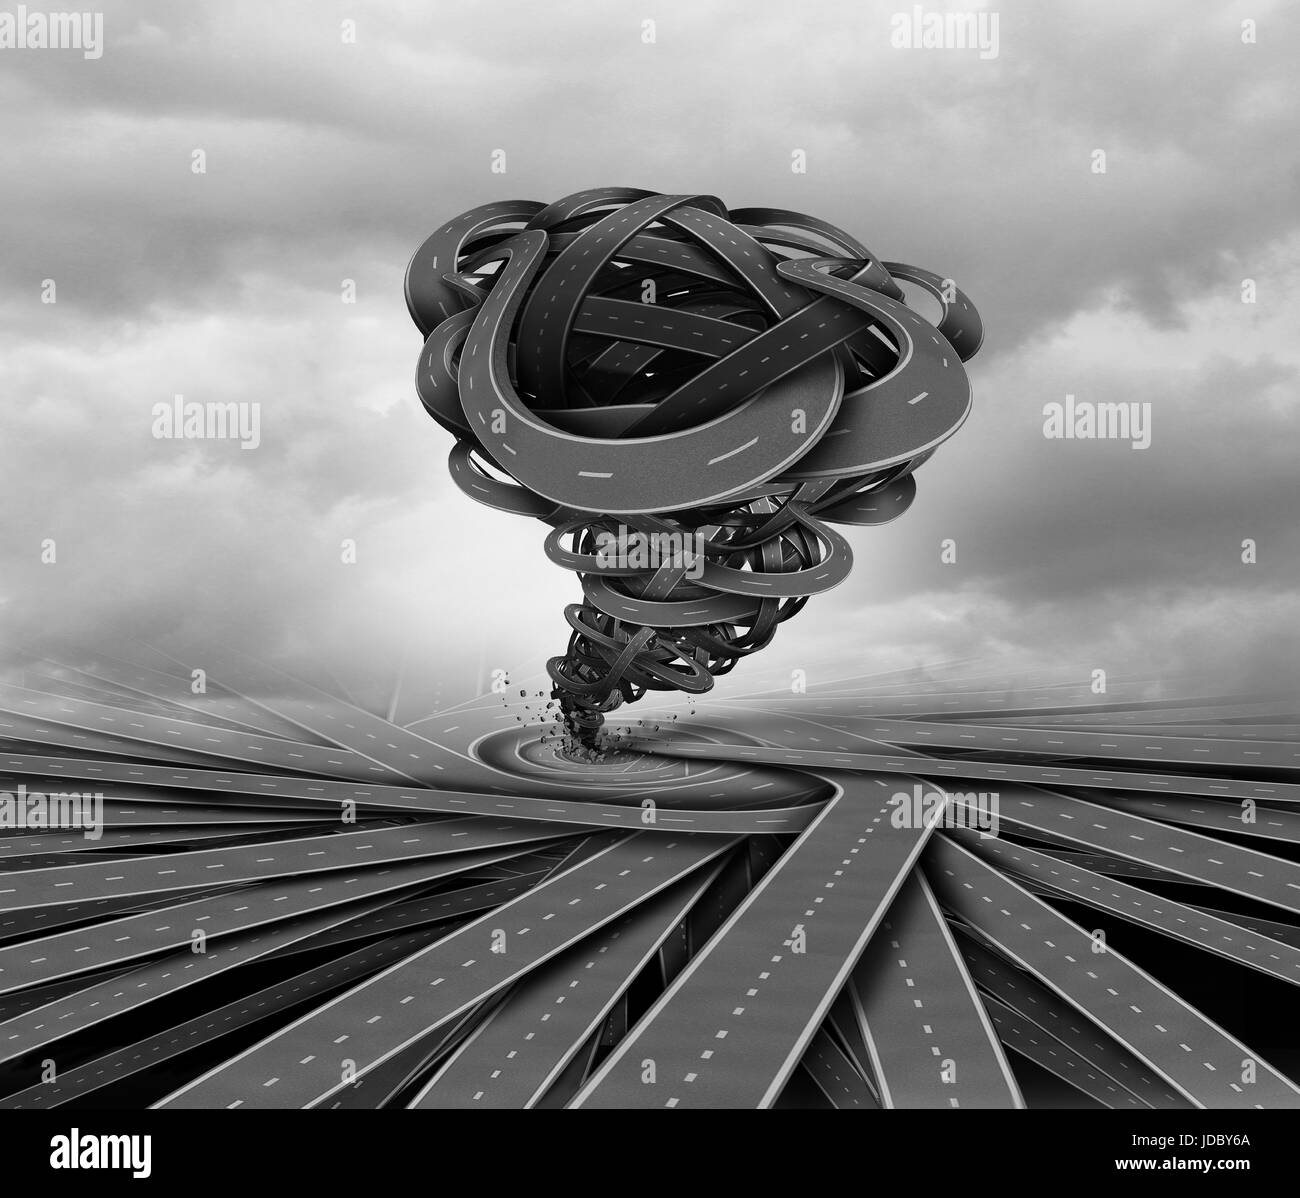 Business storm and concentration of forces creating a whirlwind tornado as a metaphor for industry change and pathway. Stock Photo